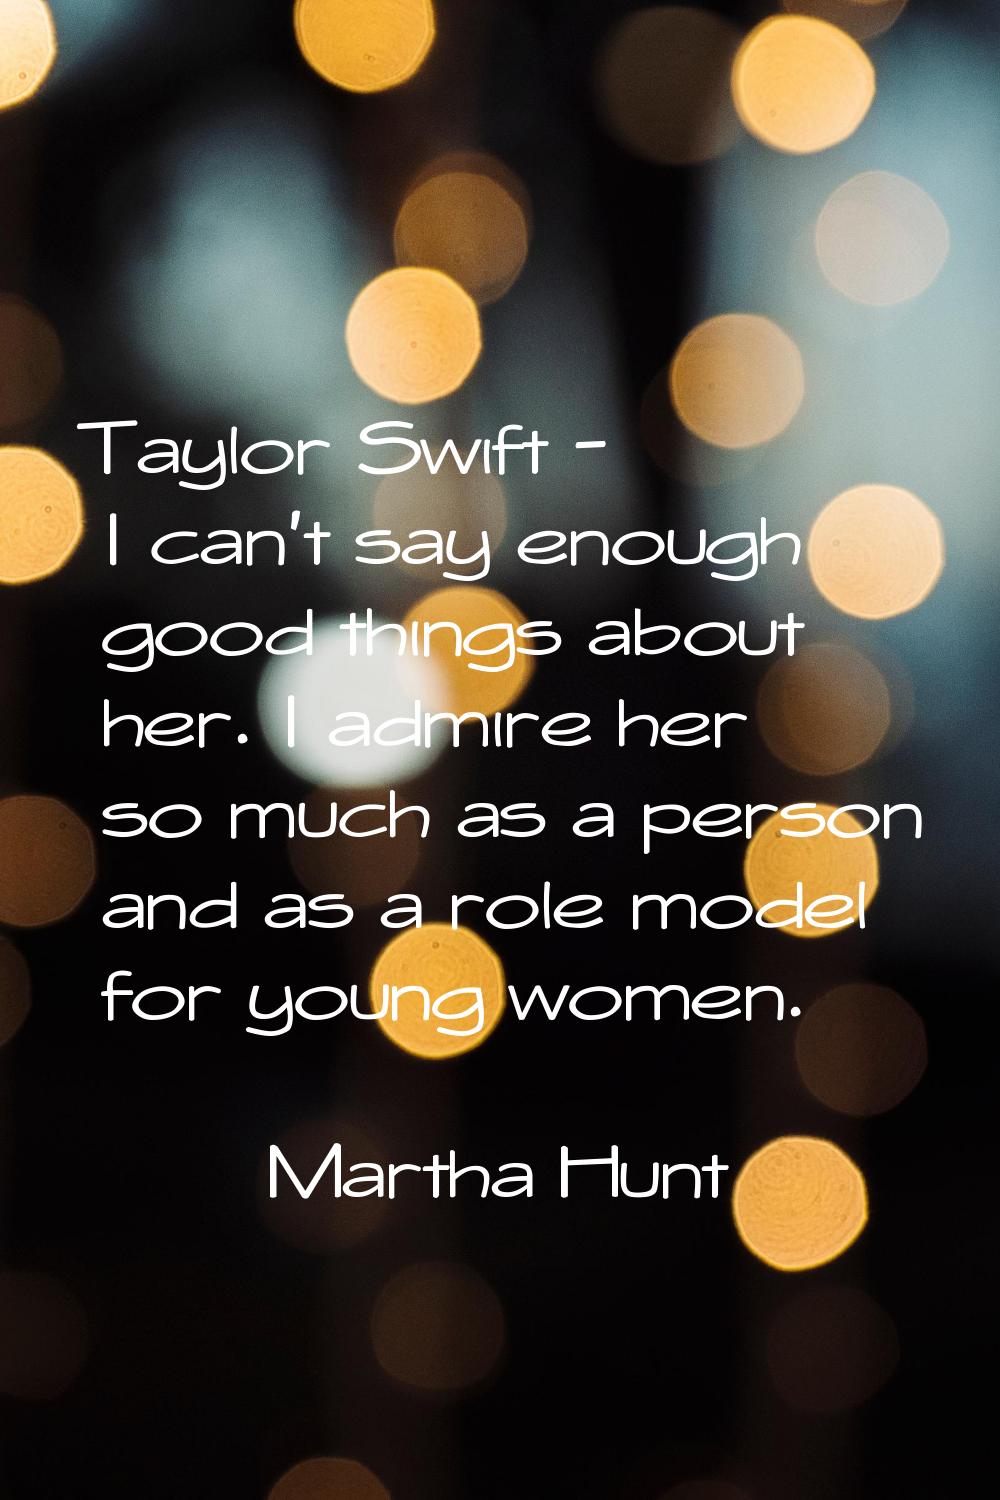 Taylor Swift - I can't say enough good things about her. I admire her so much as a person and as a 